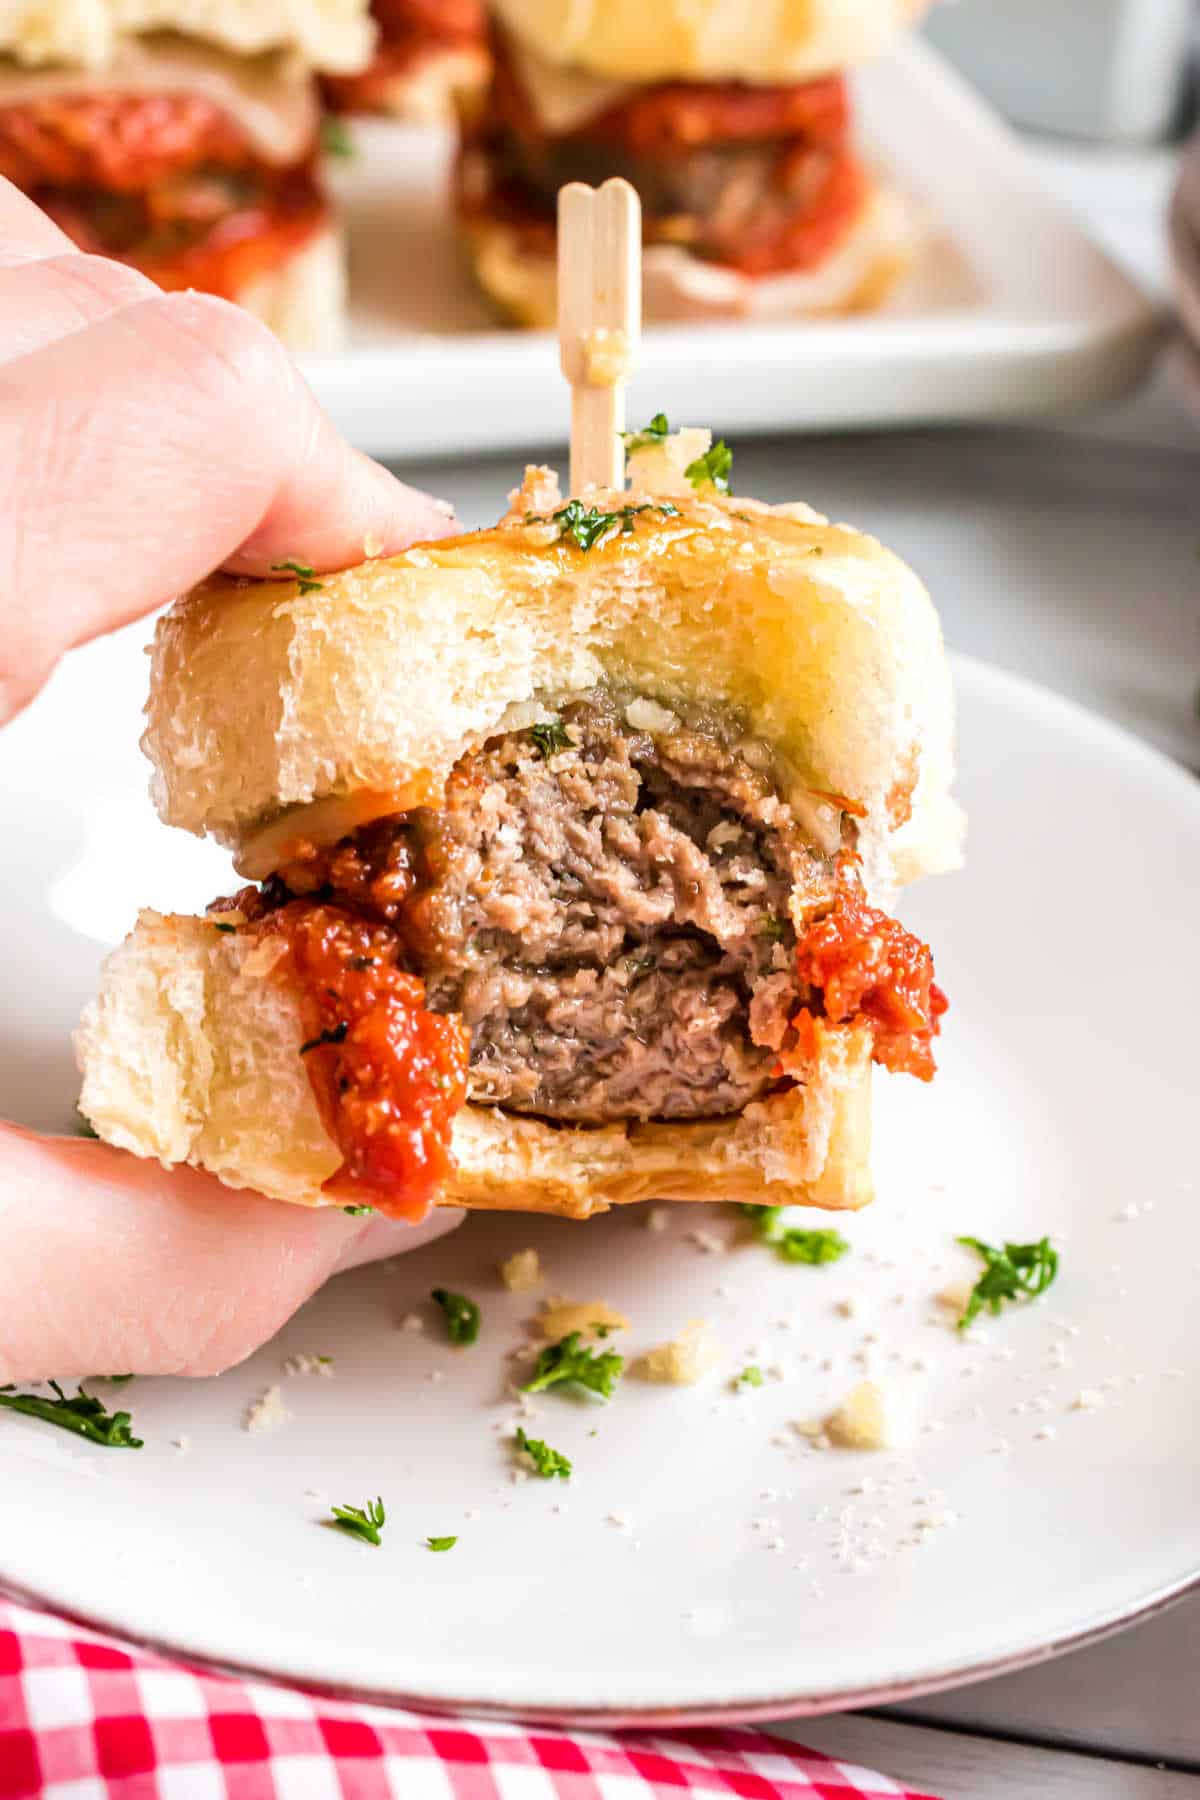 A hand holding a meatball slider with a bite out of it.